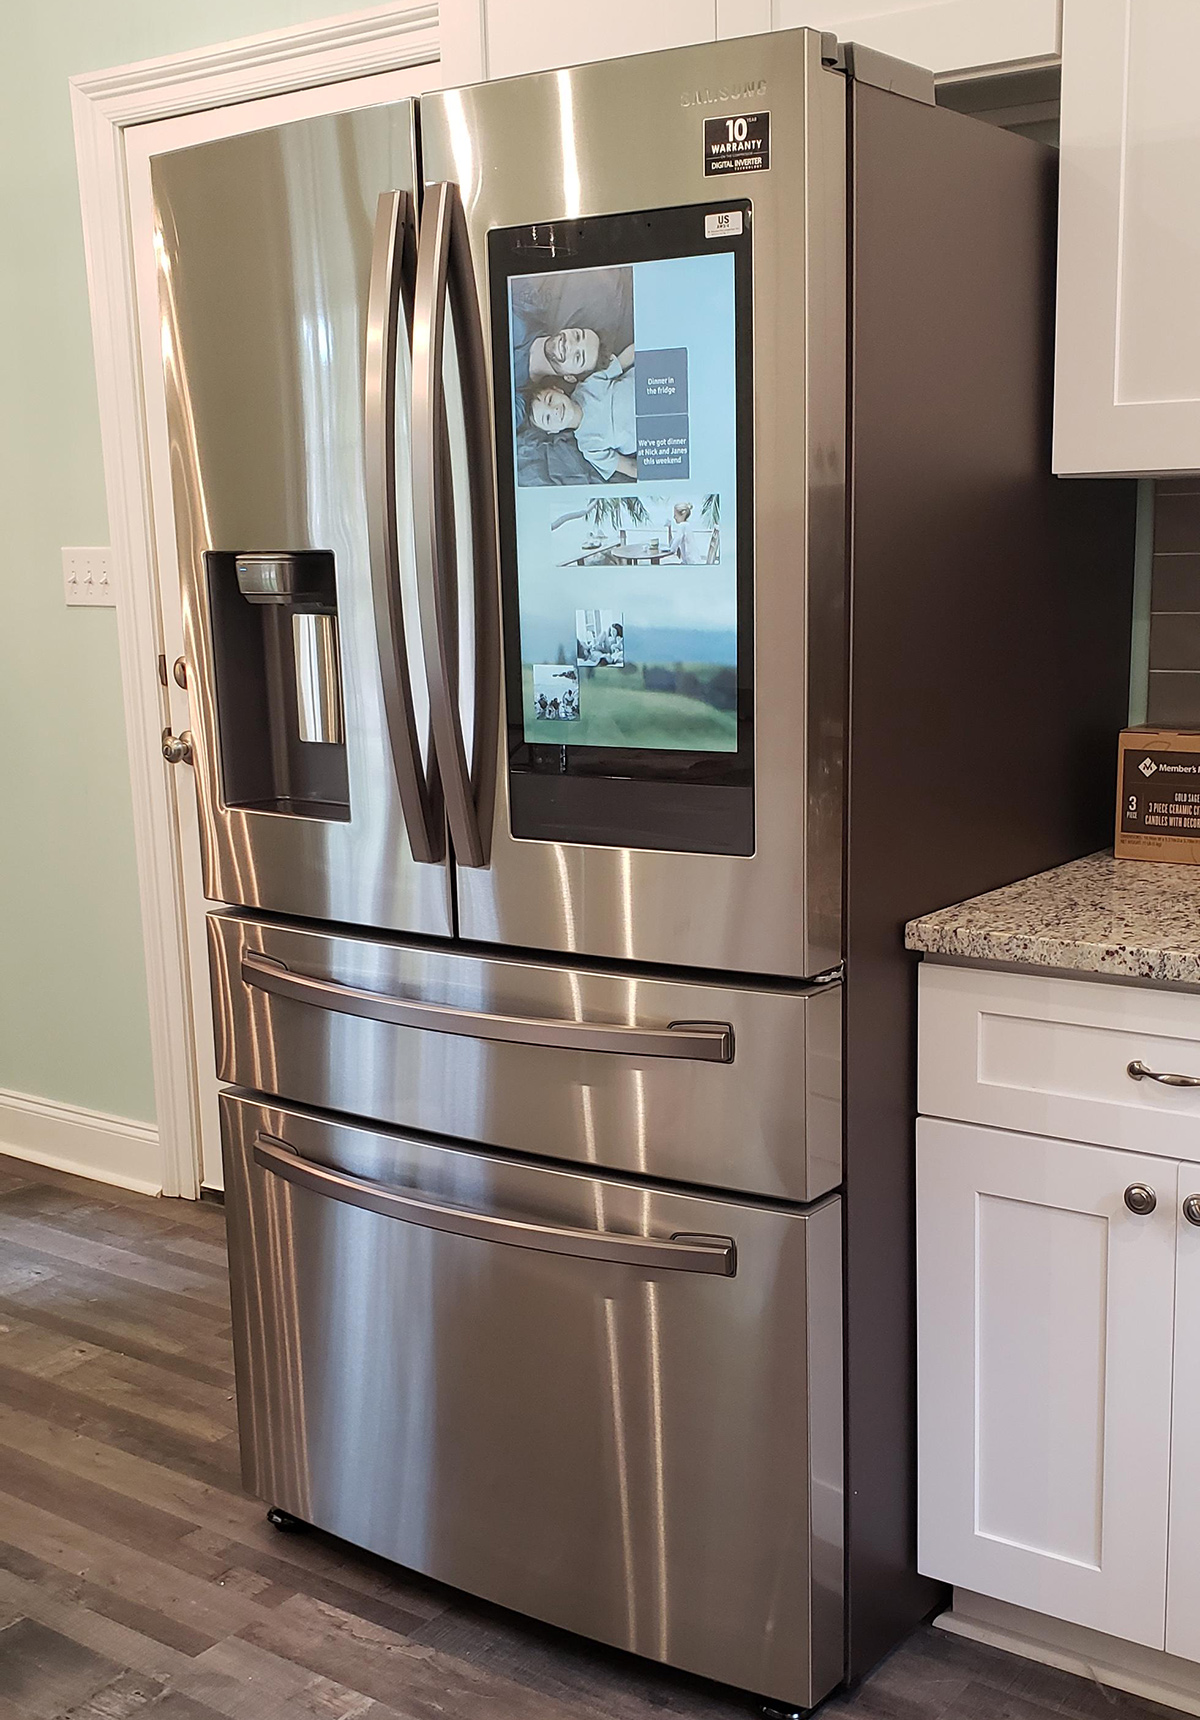 5 Best Refrigerators To Buy In 2020 1 Brand That S The Worst